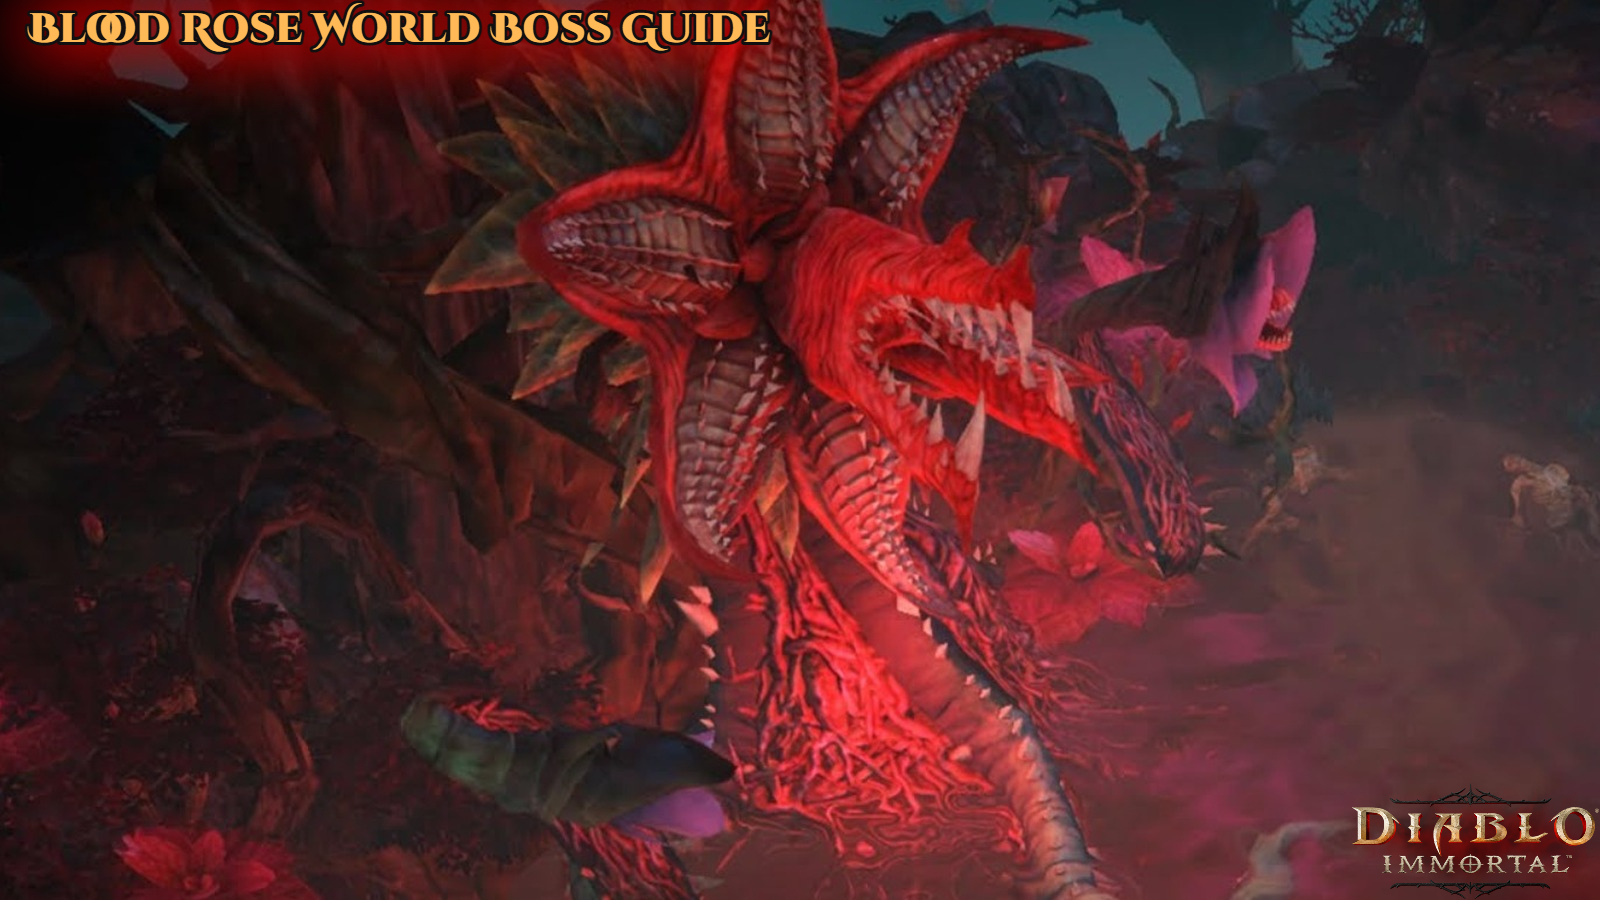 You are currently viewing Diablo Immortal Blood Rose World Boss Guide